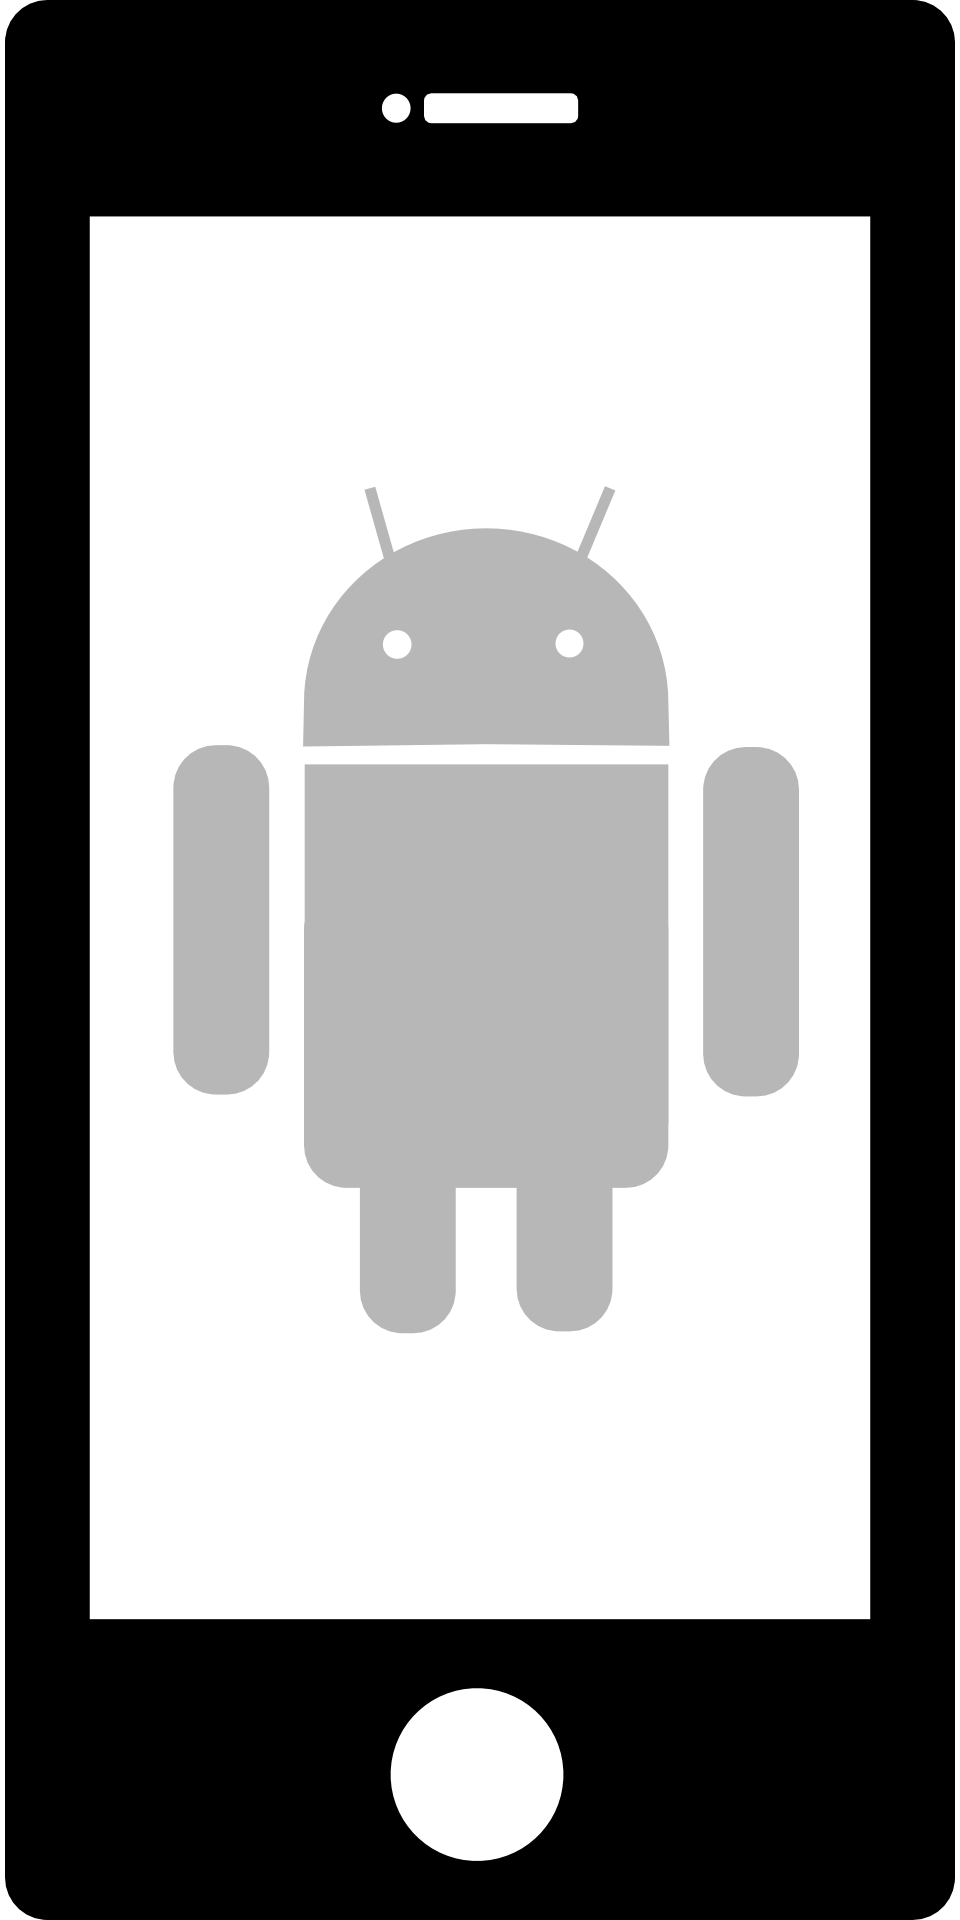 Android Phone Logo - File:Android logo 10.png - Wikimedia Commons